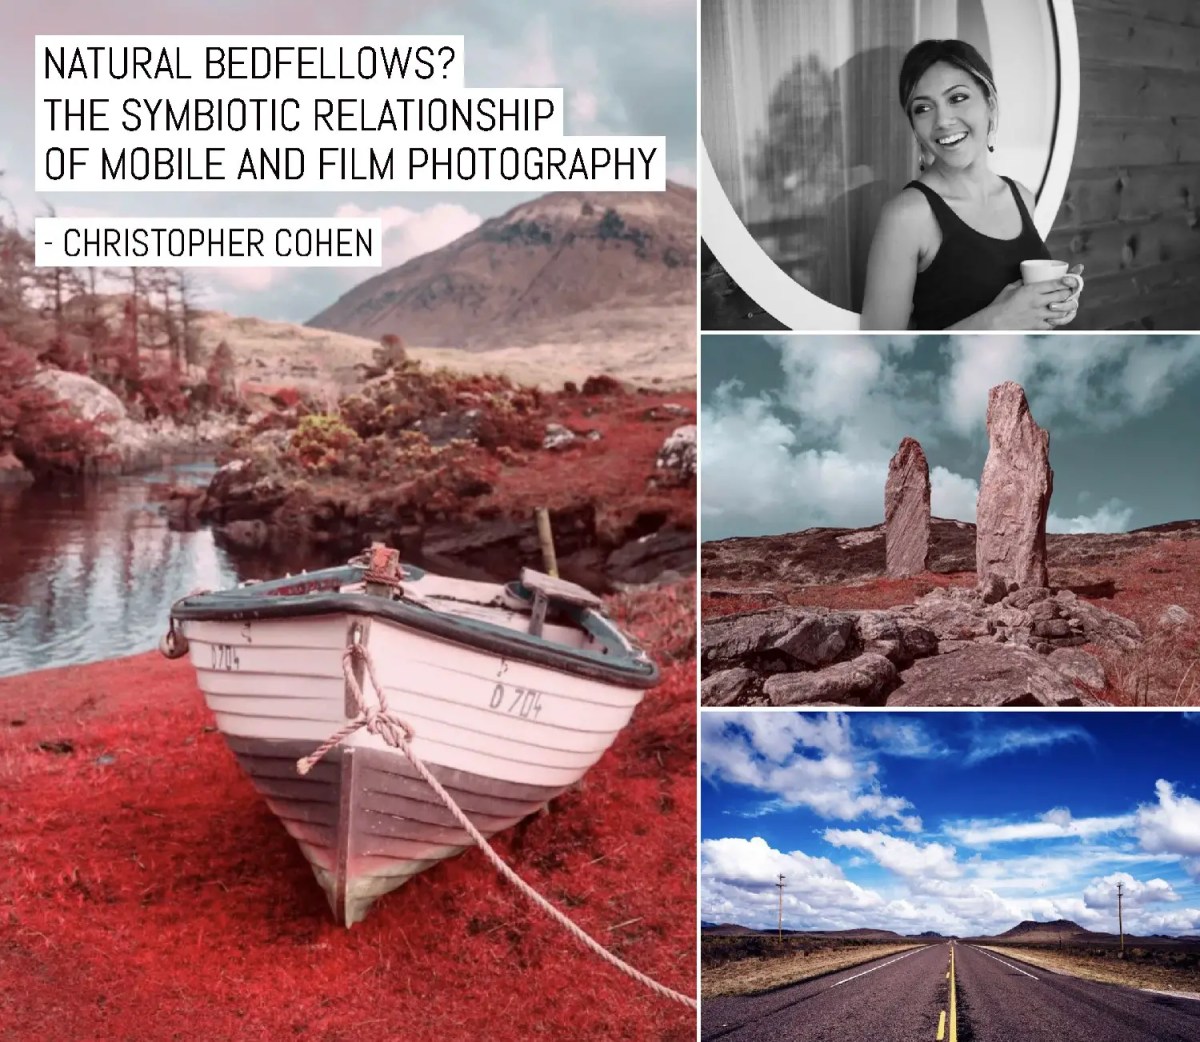 Natural bedfellows? The symbiotic relationship of Mobile and Film photography